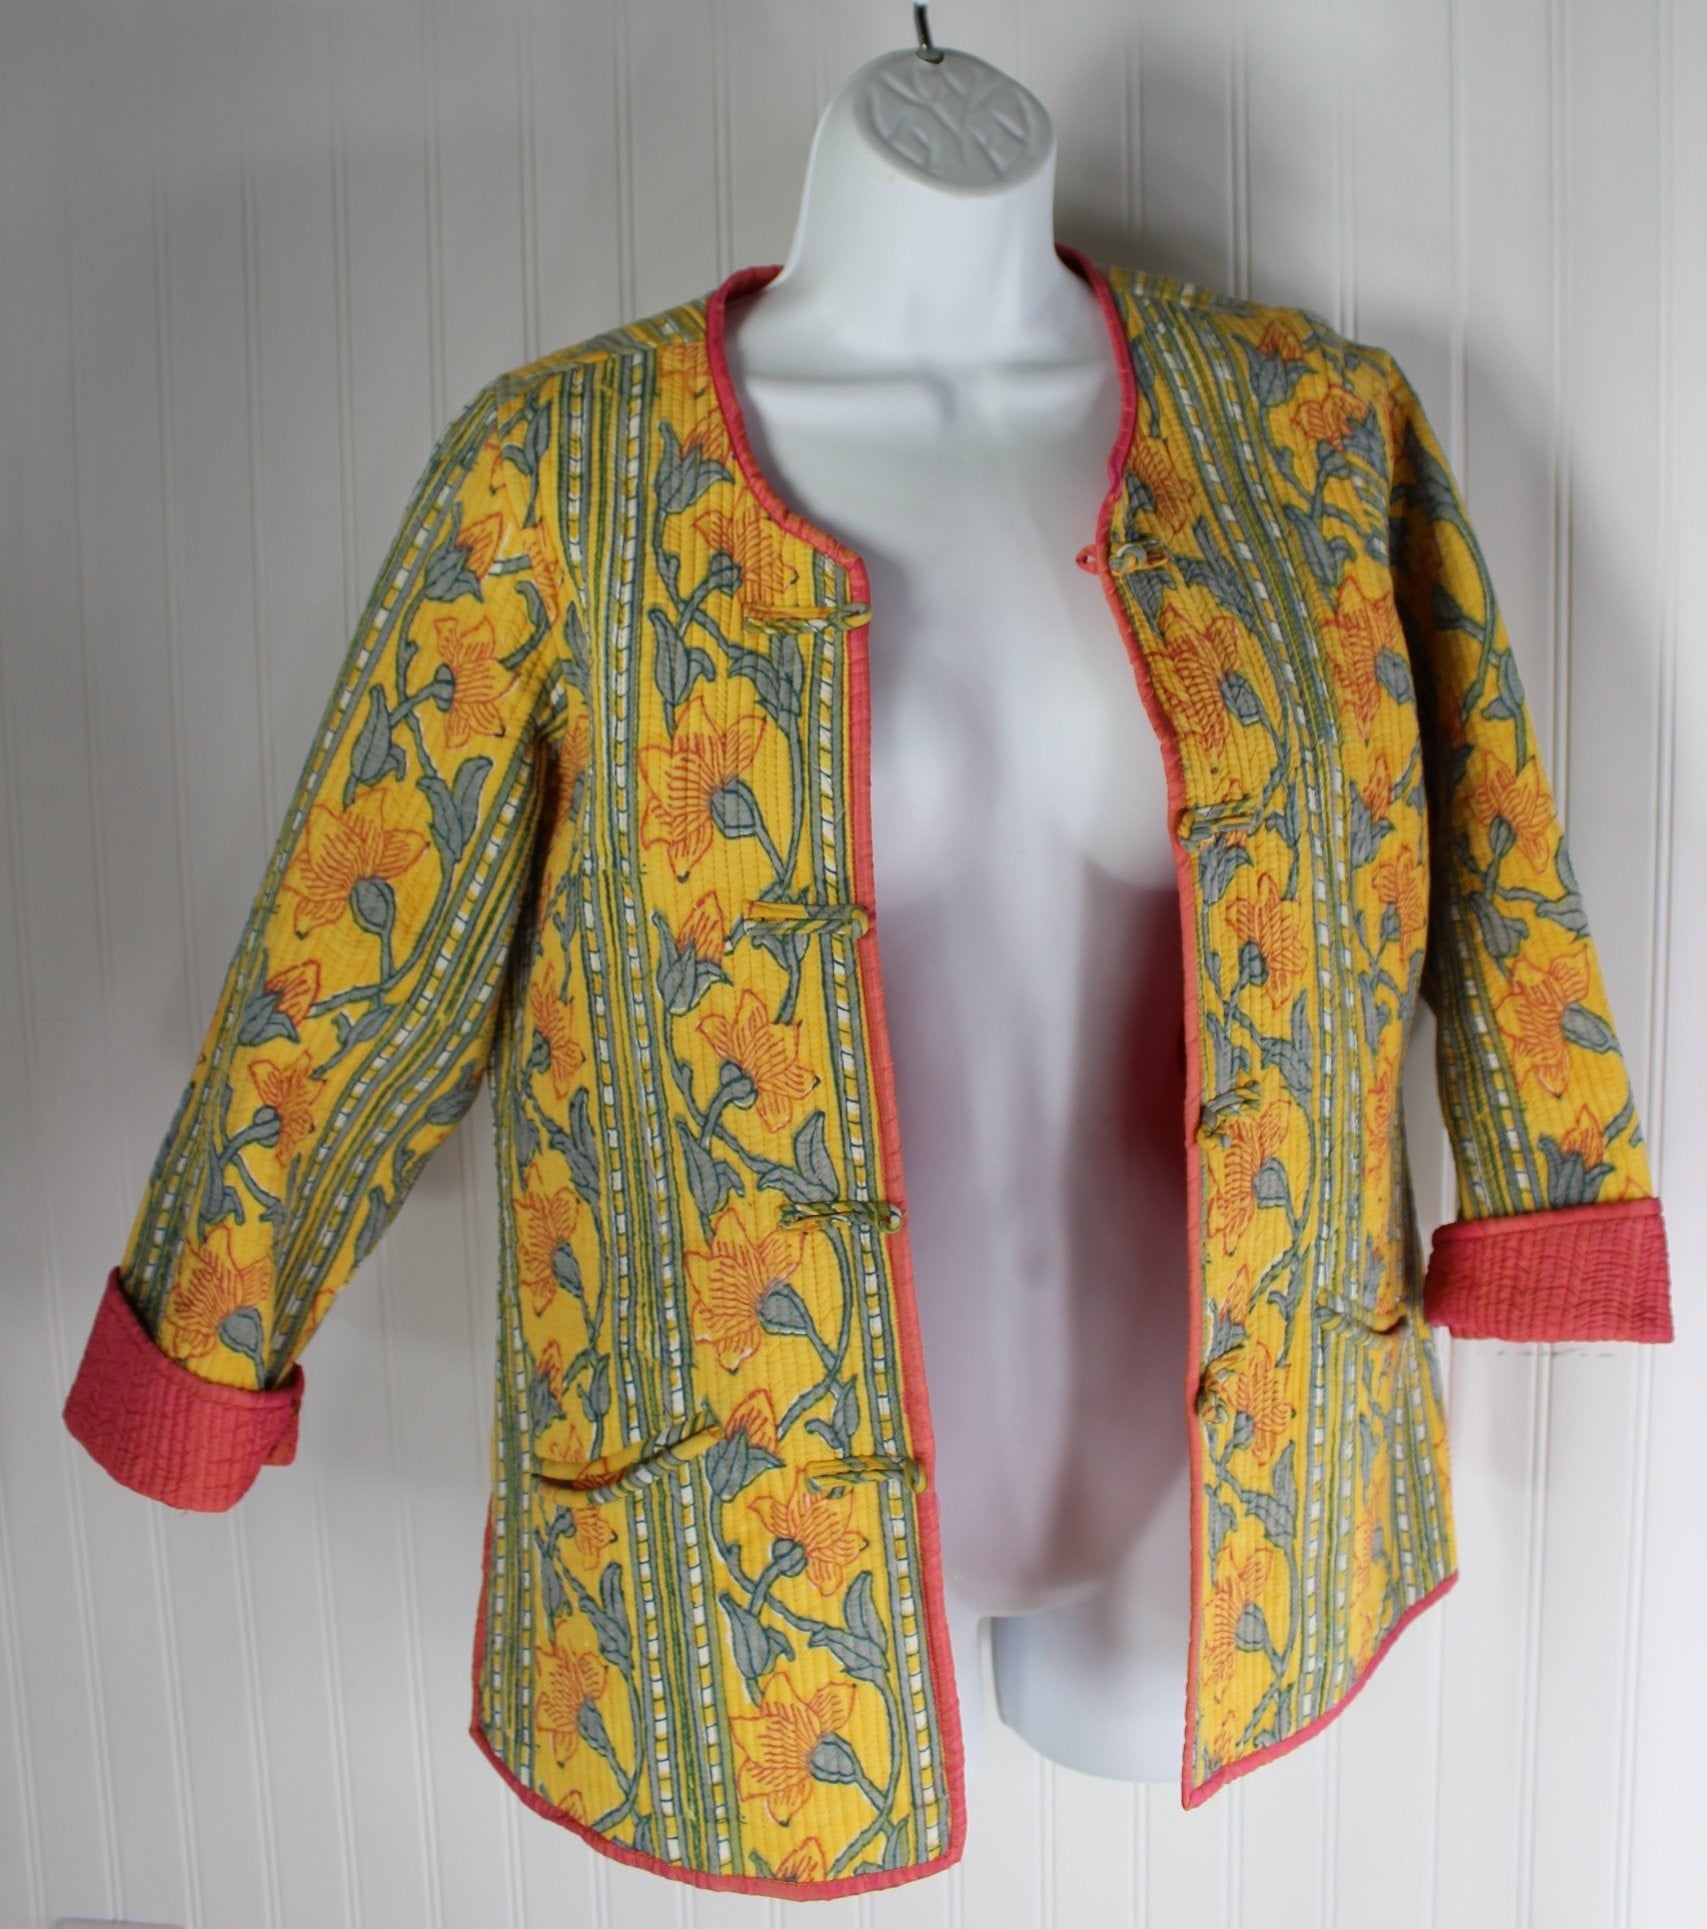 Reversible Quilted Jacket Vera Style Gold Rose Stylized Flowers Frog Closures floral